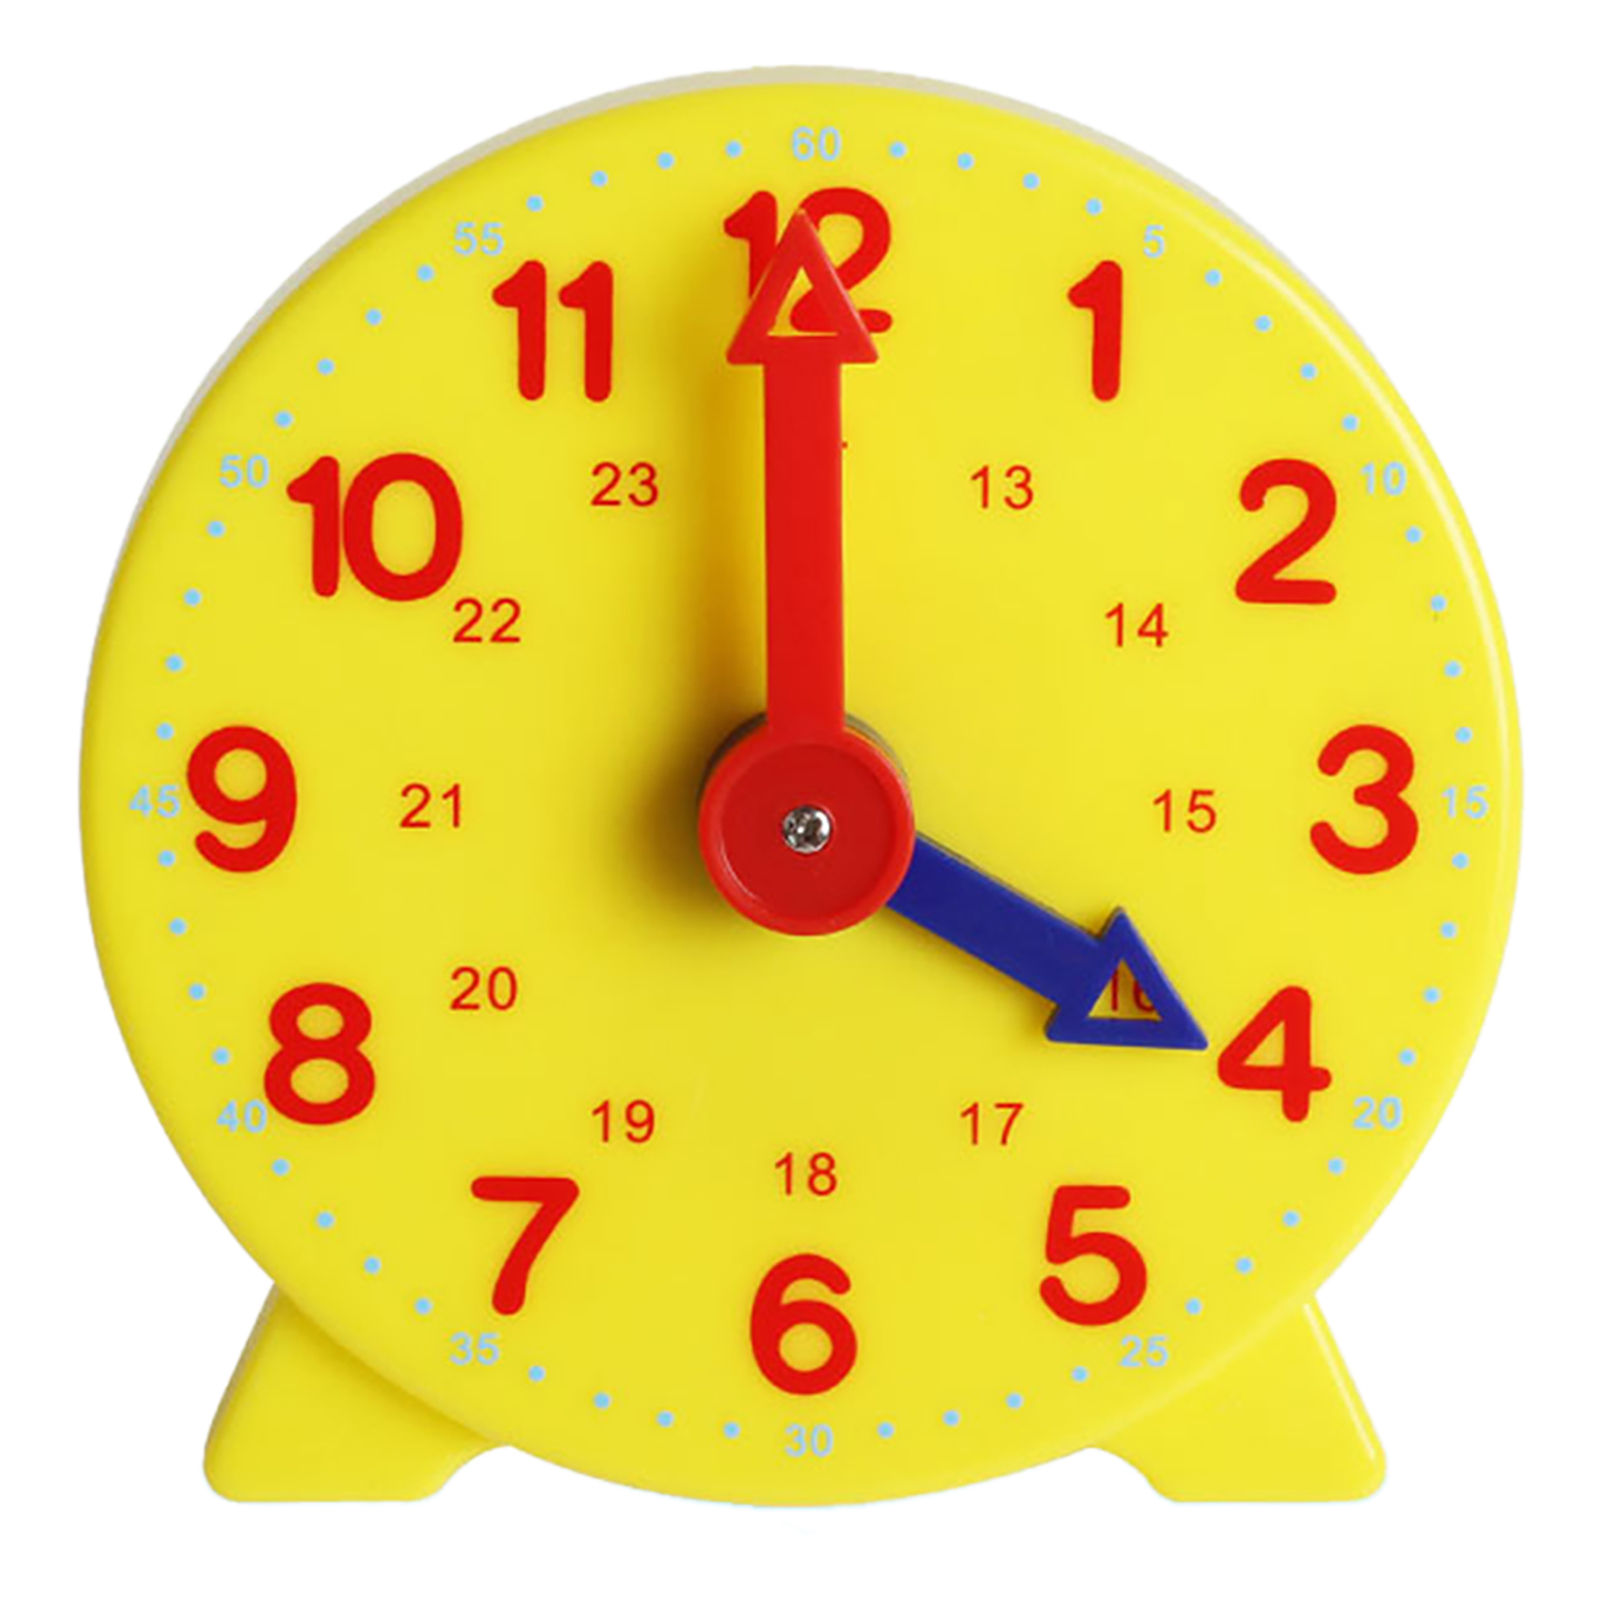 VEAREAR 10cm Plastic Clock Model Early Education Learning Kids Children Toy - image 1 of 6